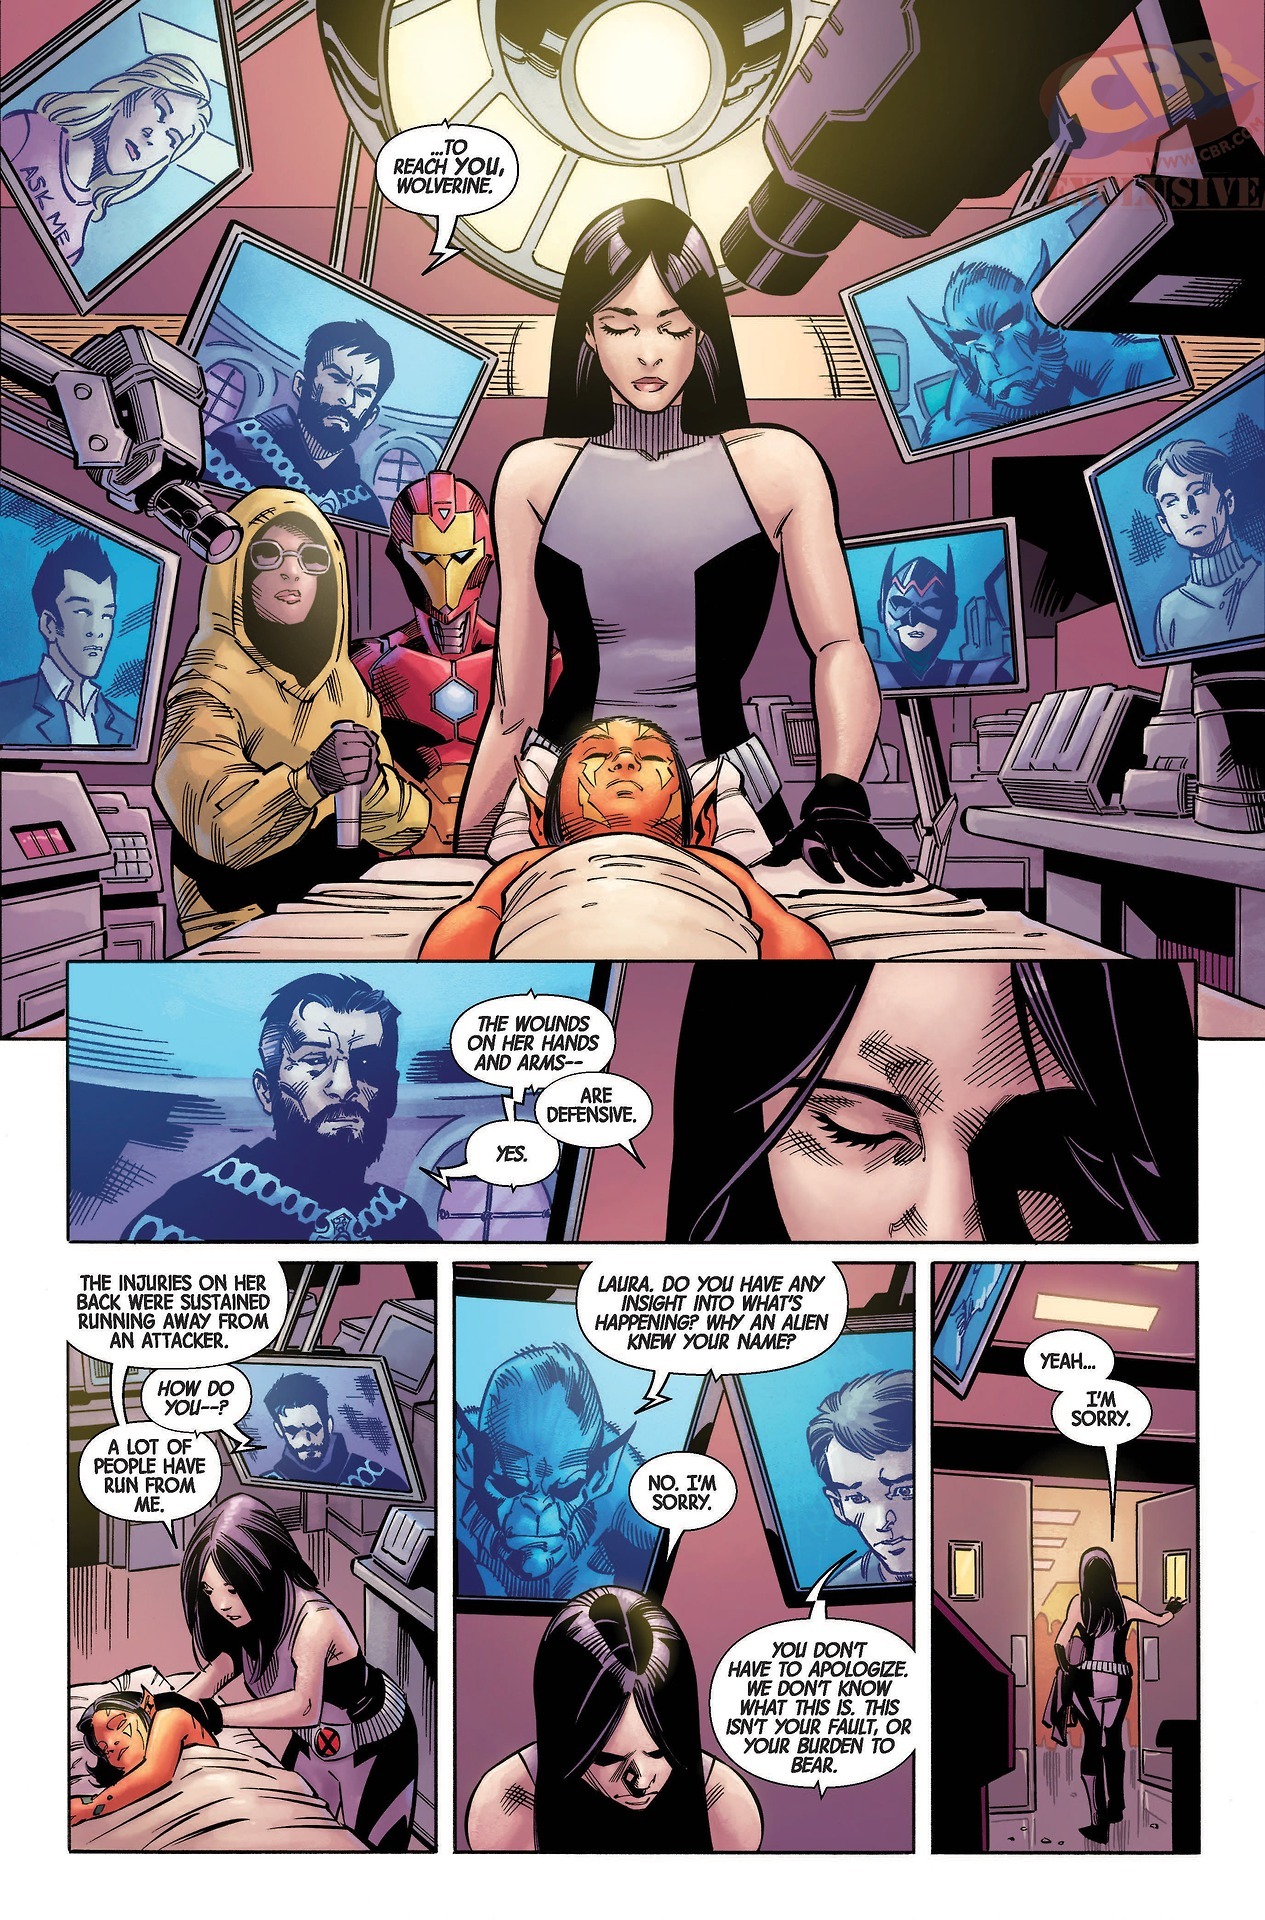 le-flou-rouge:    EXCL. PREVIEW: All-New Wolverine #20   